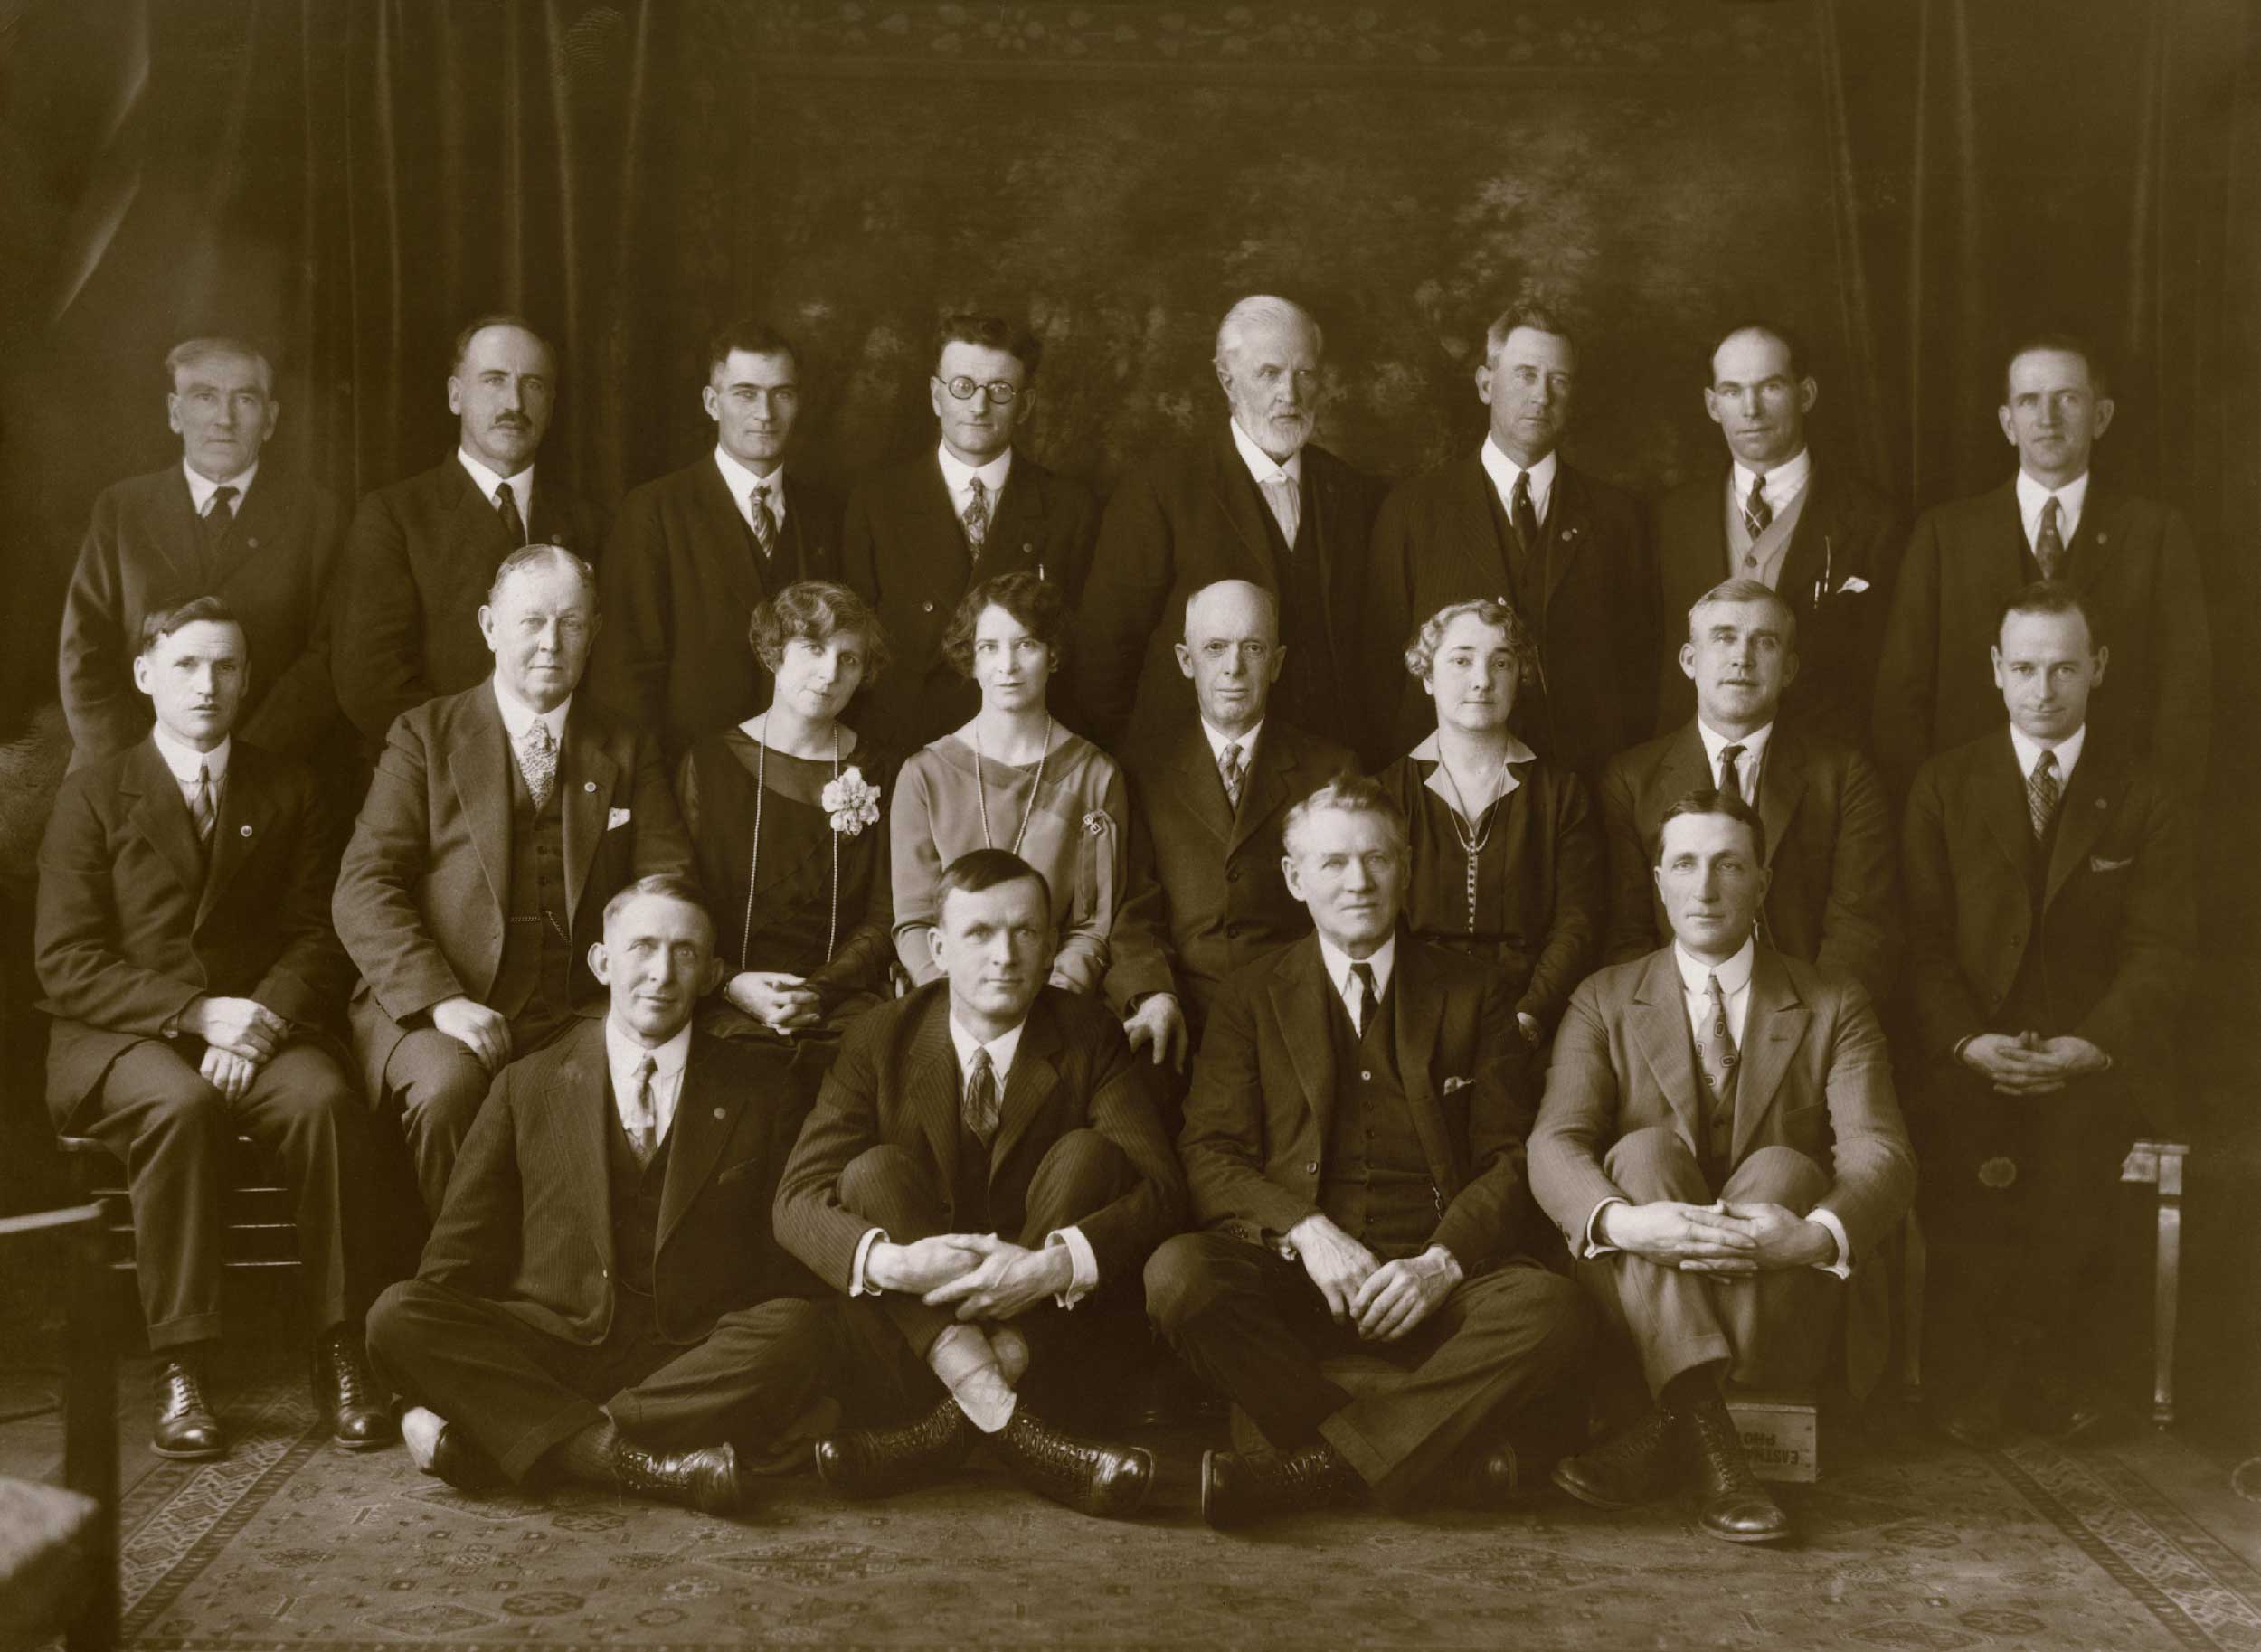  Black and white photograph of group of people